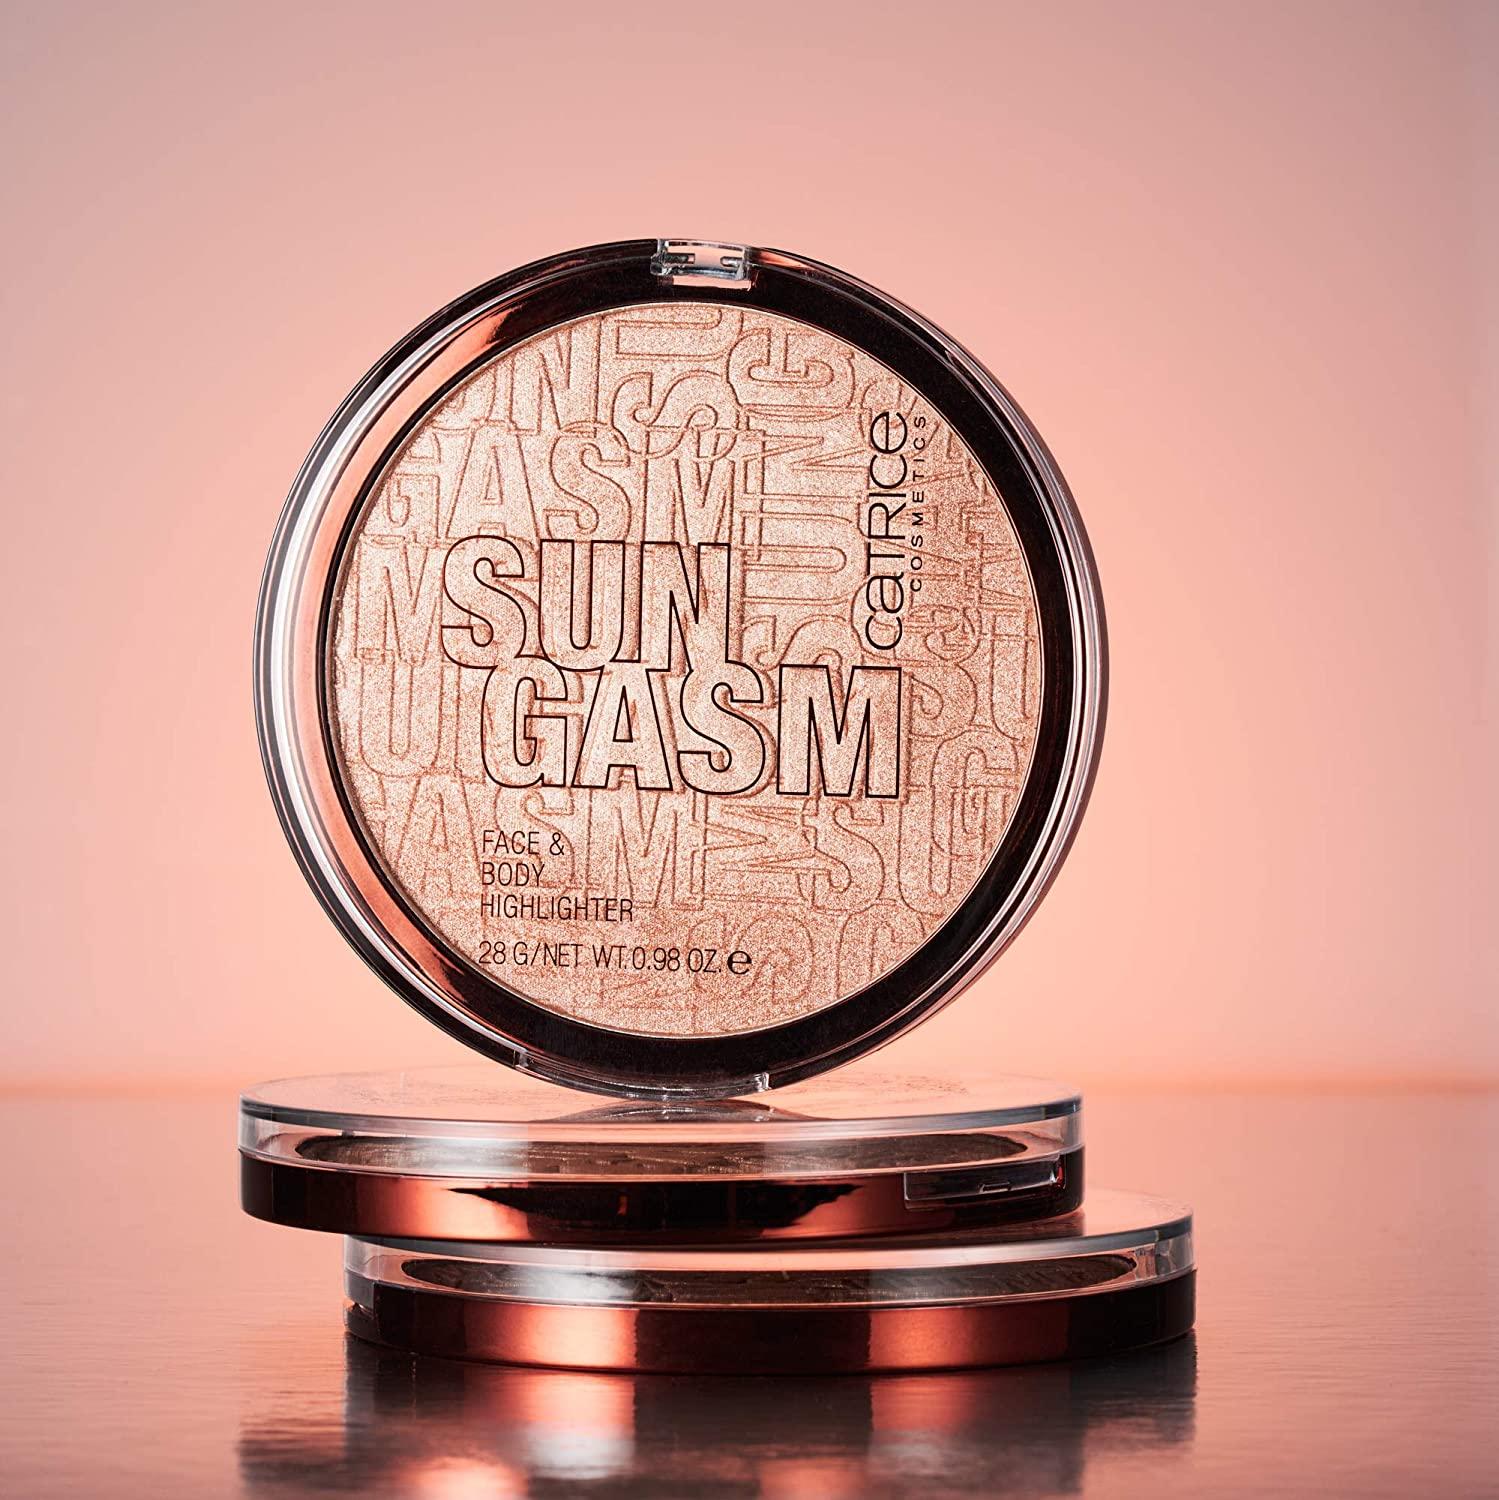 Catrice | SUNGASM Face & With Pigments Reflecting Jumbo For Oil Highlighter Sized, Cruelty | Skintones | Powder | All Light | Free Free, Soft Silky Vegan, Free Body Paraben